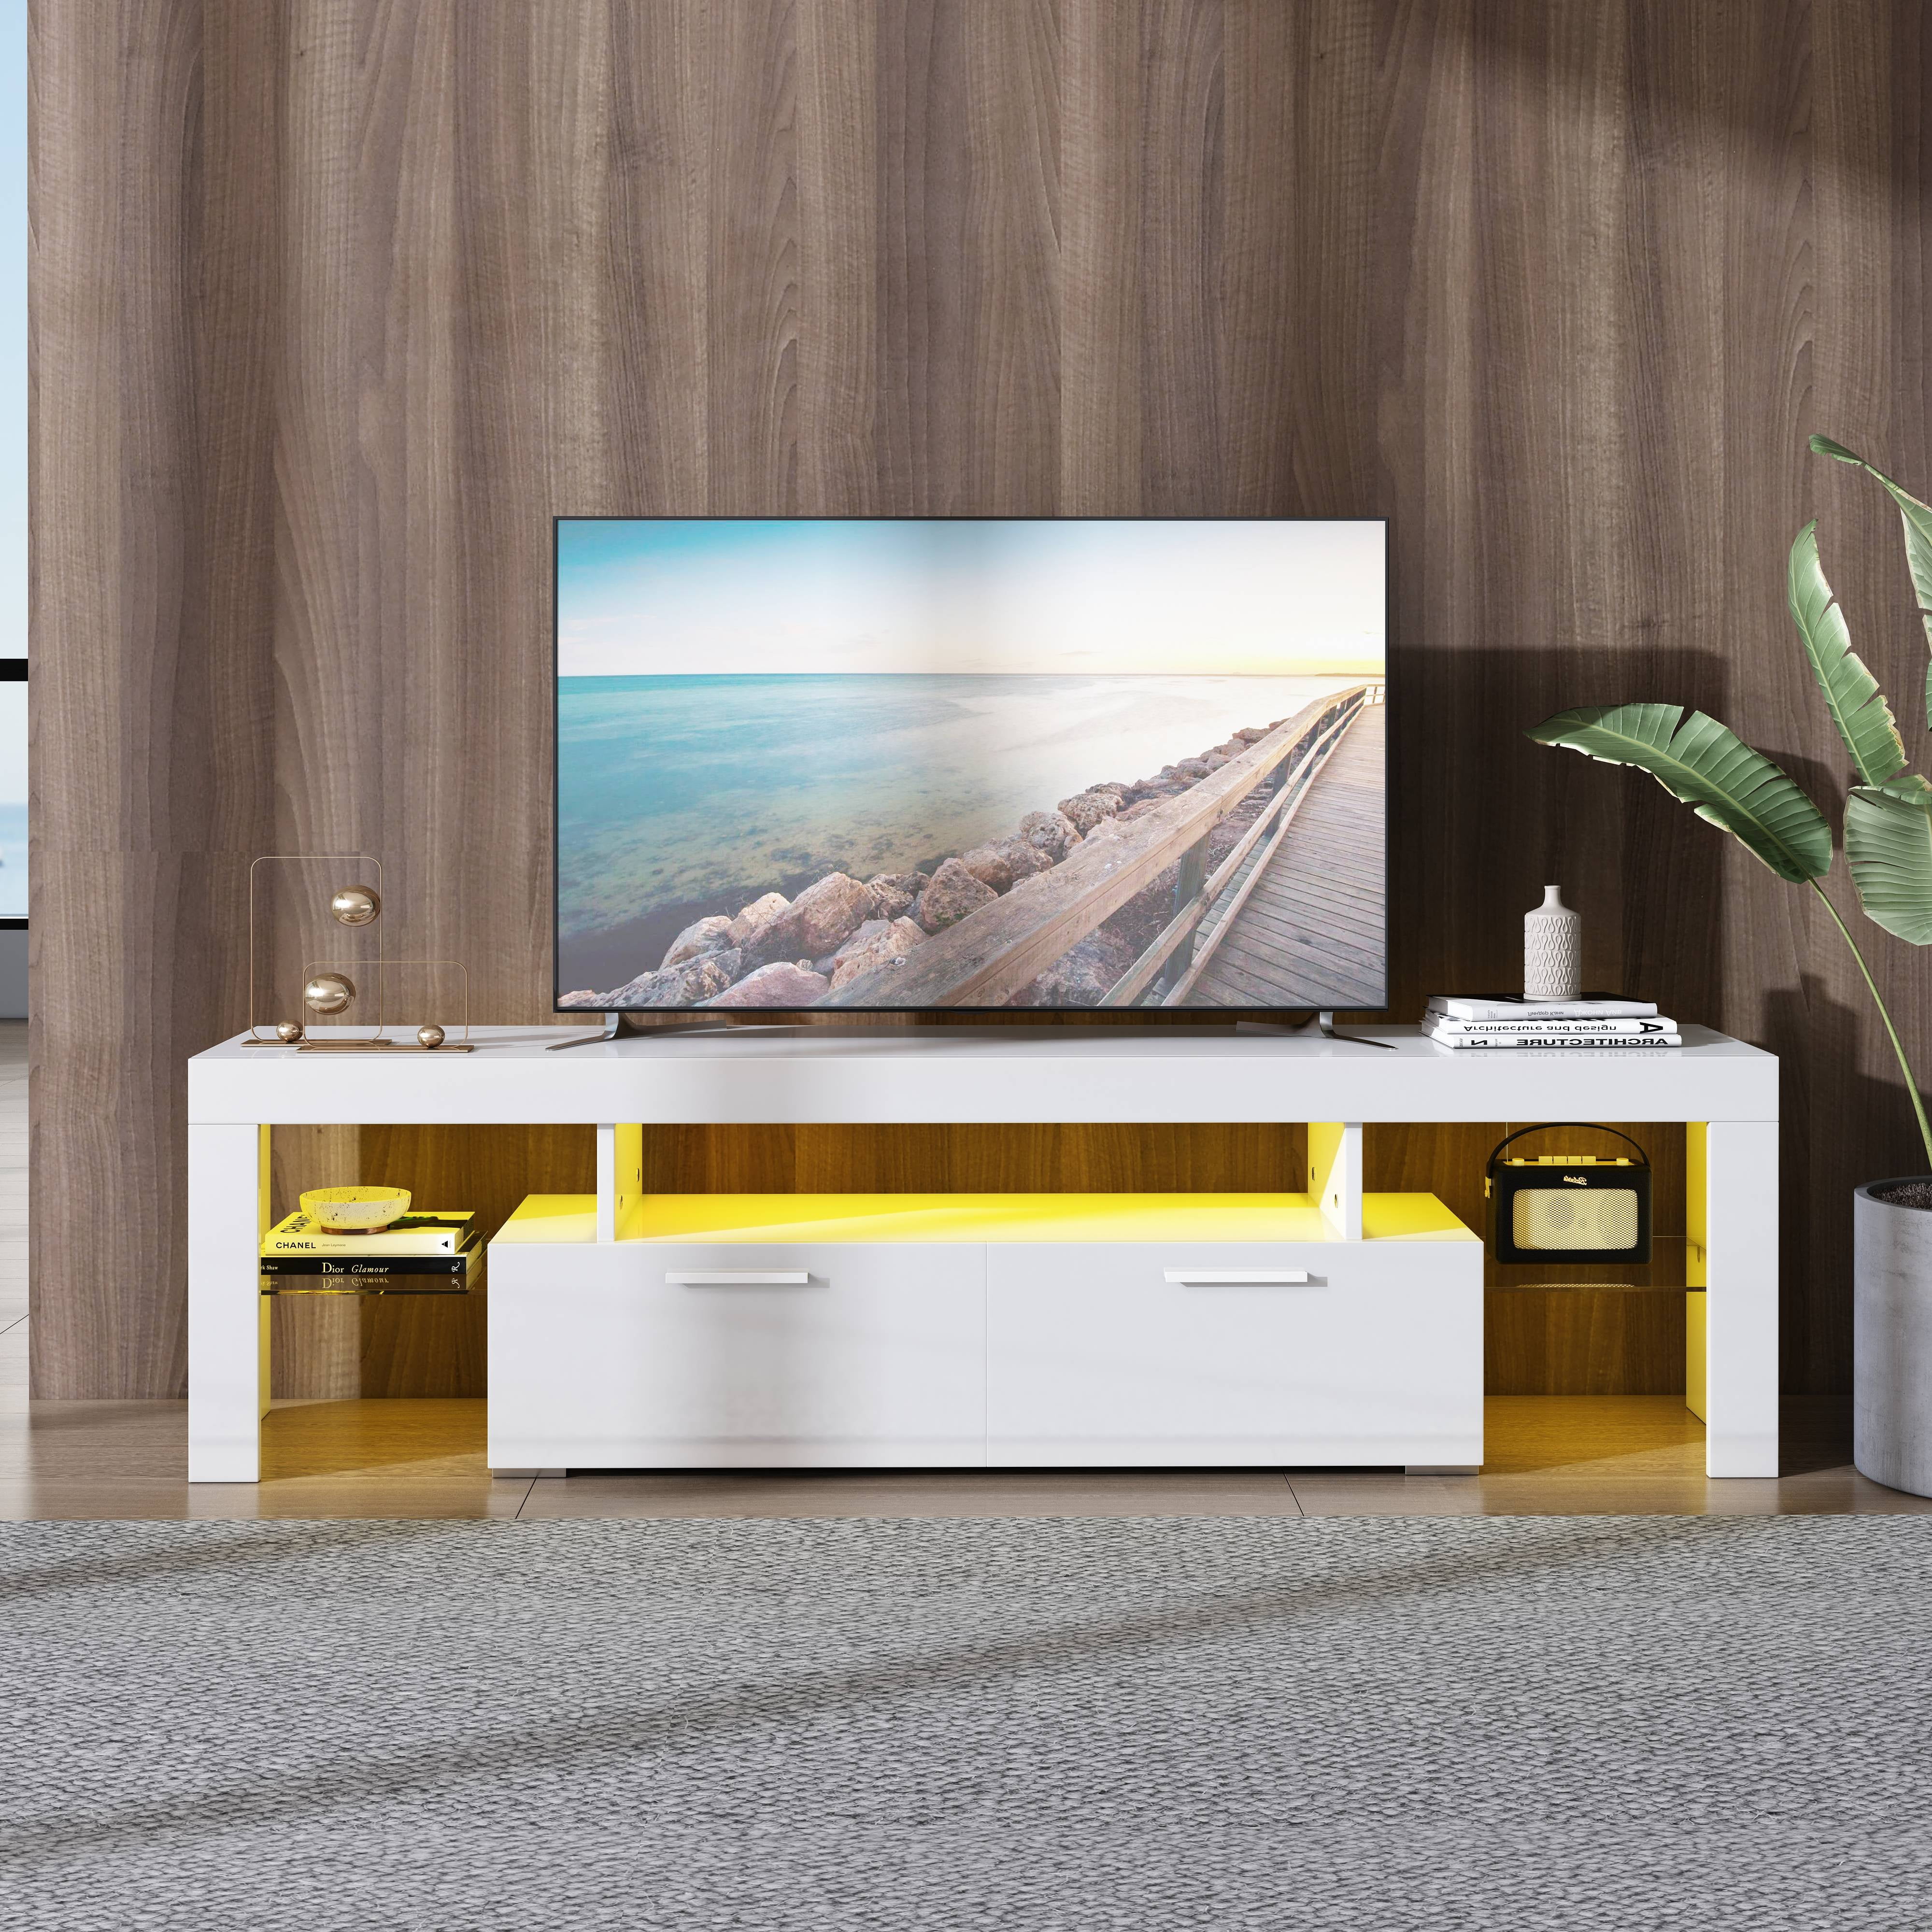 BTMWAY White TV Stand for 80 Inch TV, Modern High Glossy TV Cabinet with  Remote Control and 16 Colors LED Light, Living Room TV Console Table with